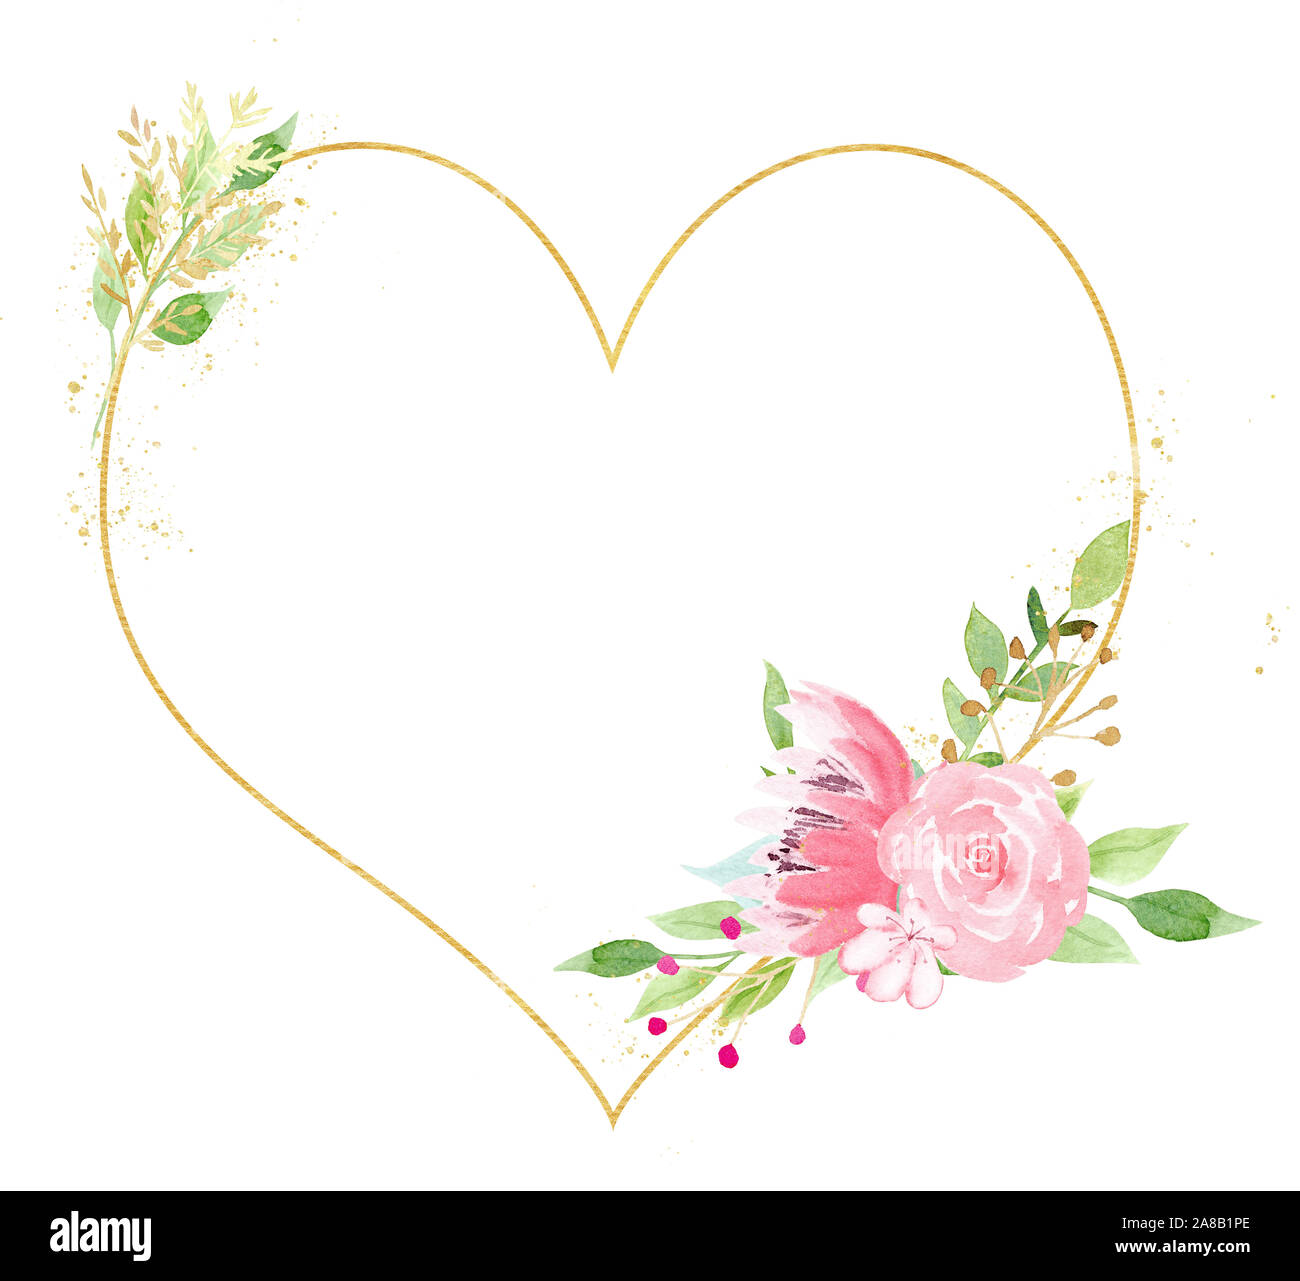 Watercolor Botanical Heart Frame Clipart Graphic by